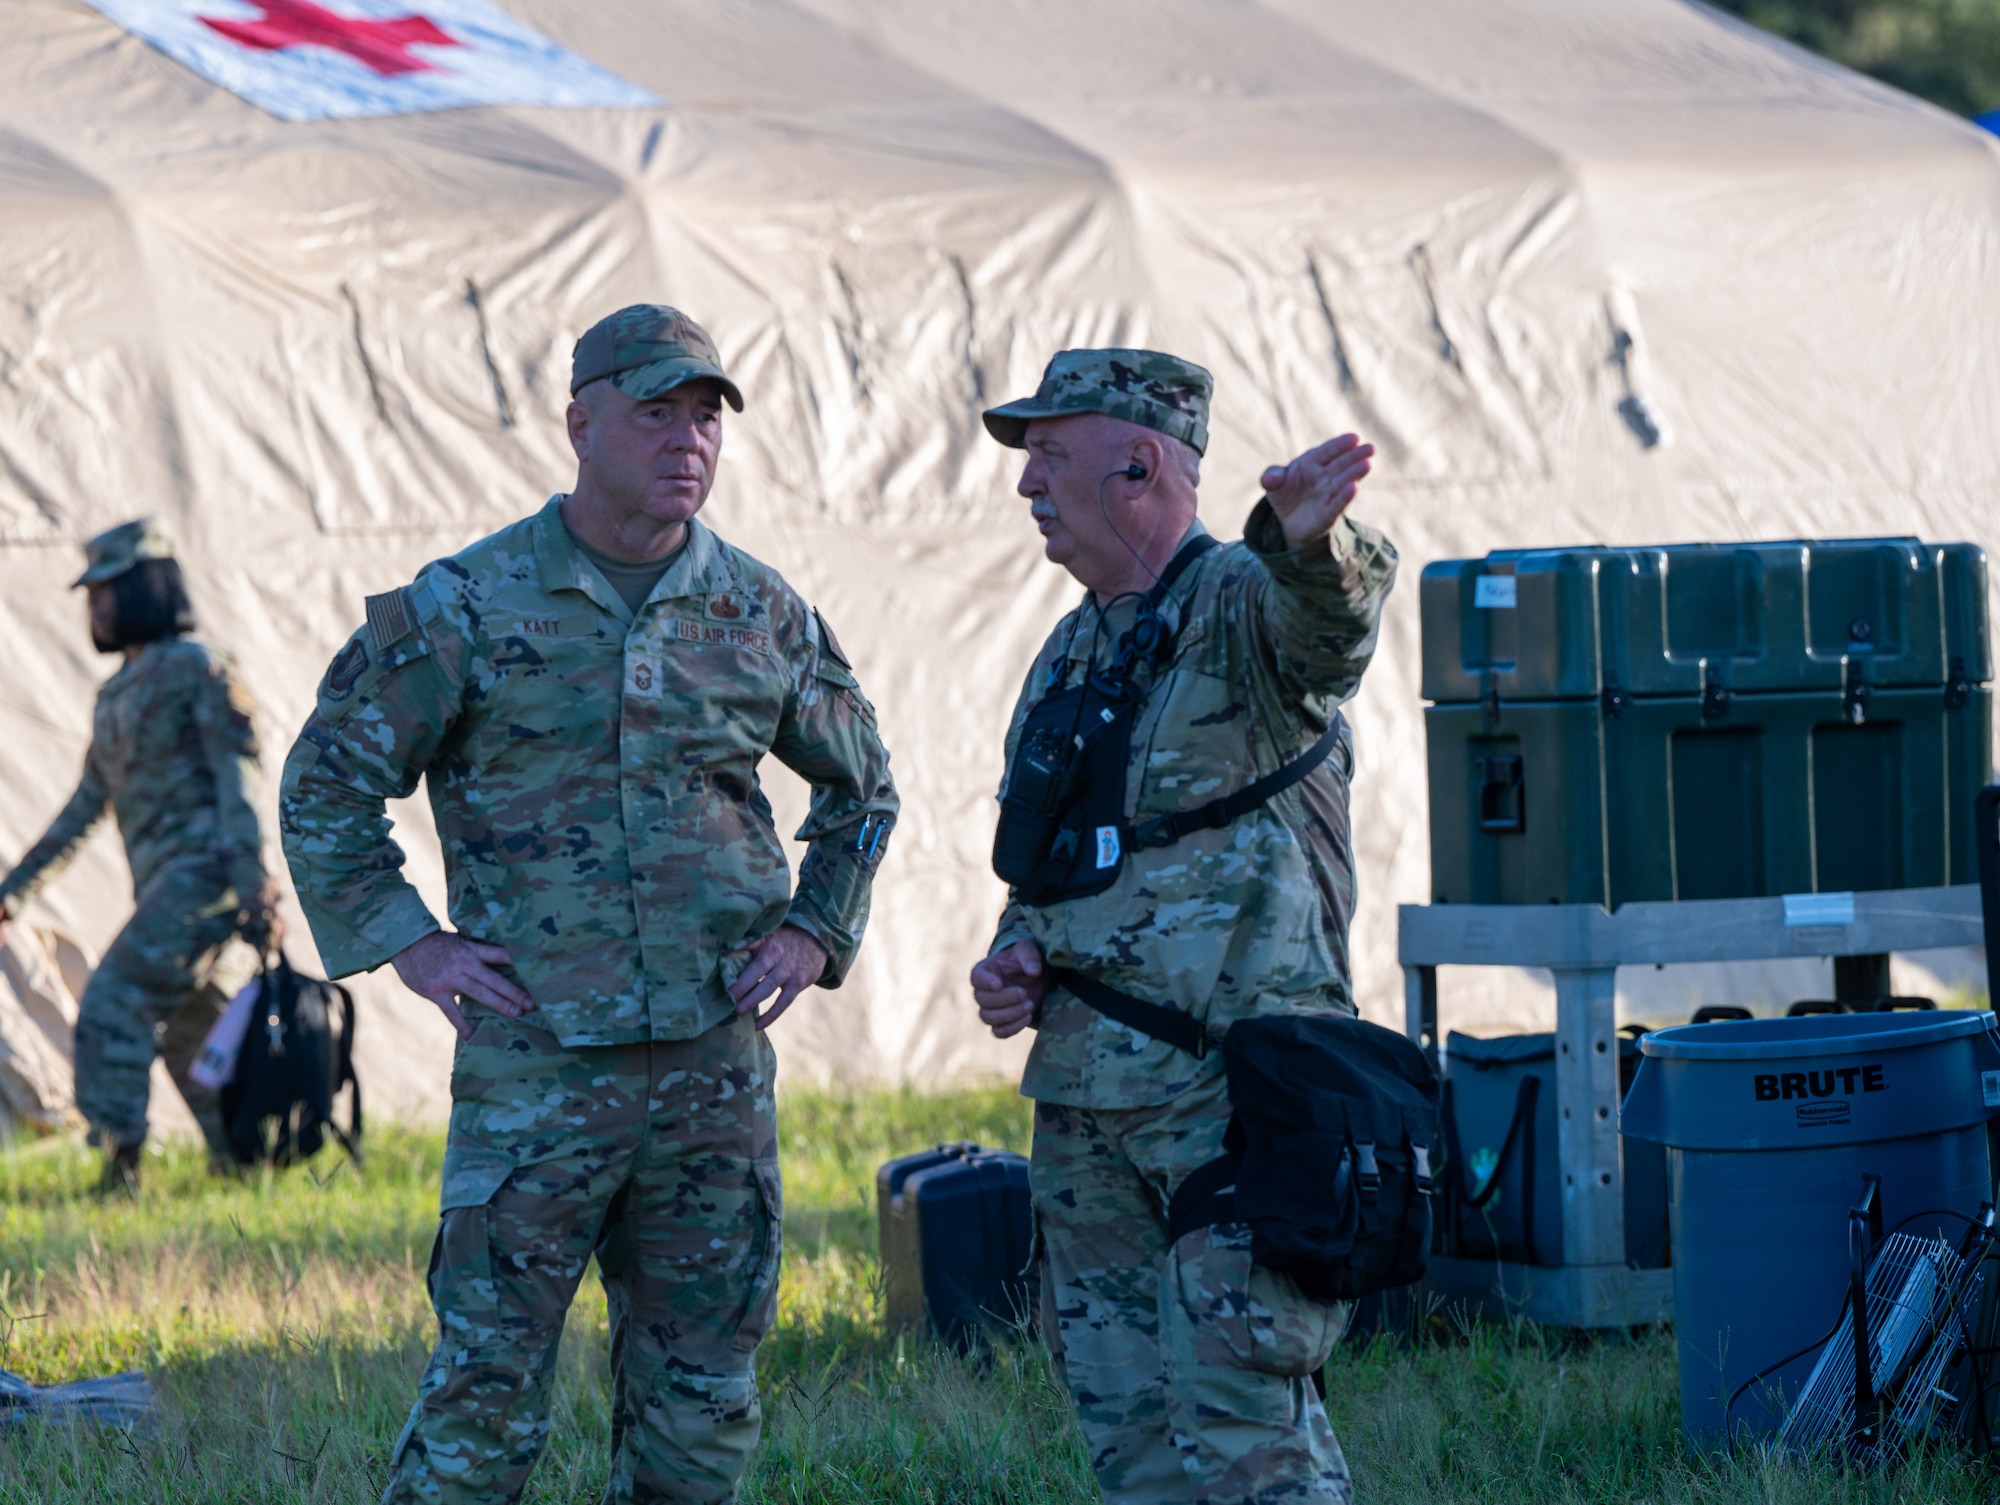 U.S. Air Force Lt. Col. Matthew Sands, 125th Medical Detachment commander and Chief Master Sgt. Thomas Katt, 125th Medical Group senior enlisted leader, pictured during a CERFP External Evaluation, Sept. 22, 2023 at Camp Blanding Joint Training Center, Florida. The CERFP, or CBRNE Enhanced Response Force Package, includes more than 200 Soldiers and Airmen from many Air and Army units who form one CERFP unit in the wake of a catastrophe. CERFP units comprise five major elements including command and control, search and extraction, decontamination, medical support, and fatality search and recovery in which teams are evaluated on their ability to immediately respond to a CBRNE incident. During the exercise, teams conducted a site search of collapsed buildings and structures, performed rescue tasks to extract trapped casualties, facilitated mass decontamination measures, performed medical triage and initial treatment to stabilize patients for transport to medical facilities, and recovered CBRN incident fatalities. Each element — CBRN, medics, decontamination, search and extraction, and FSRT (fatality, search and recovery team) — was evaluated as part of the total force response. (U.S. Air National Guard photo by Tech Sgt. Chelsea Smith)